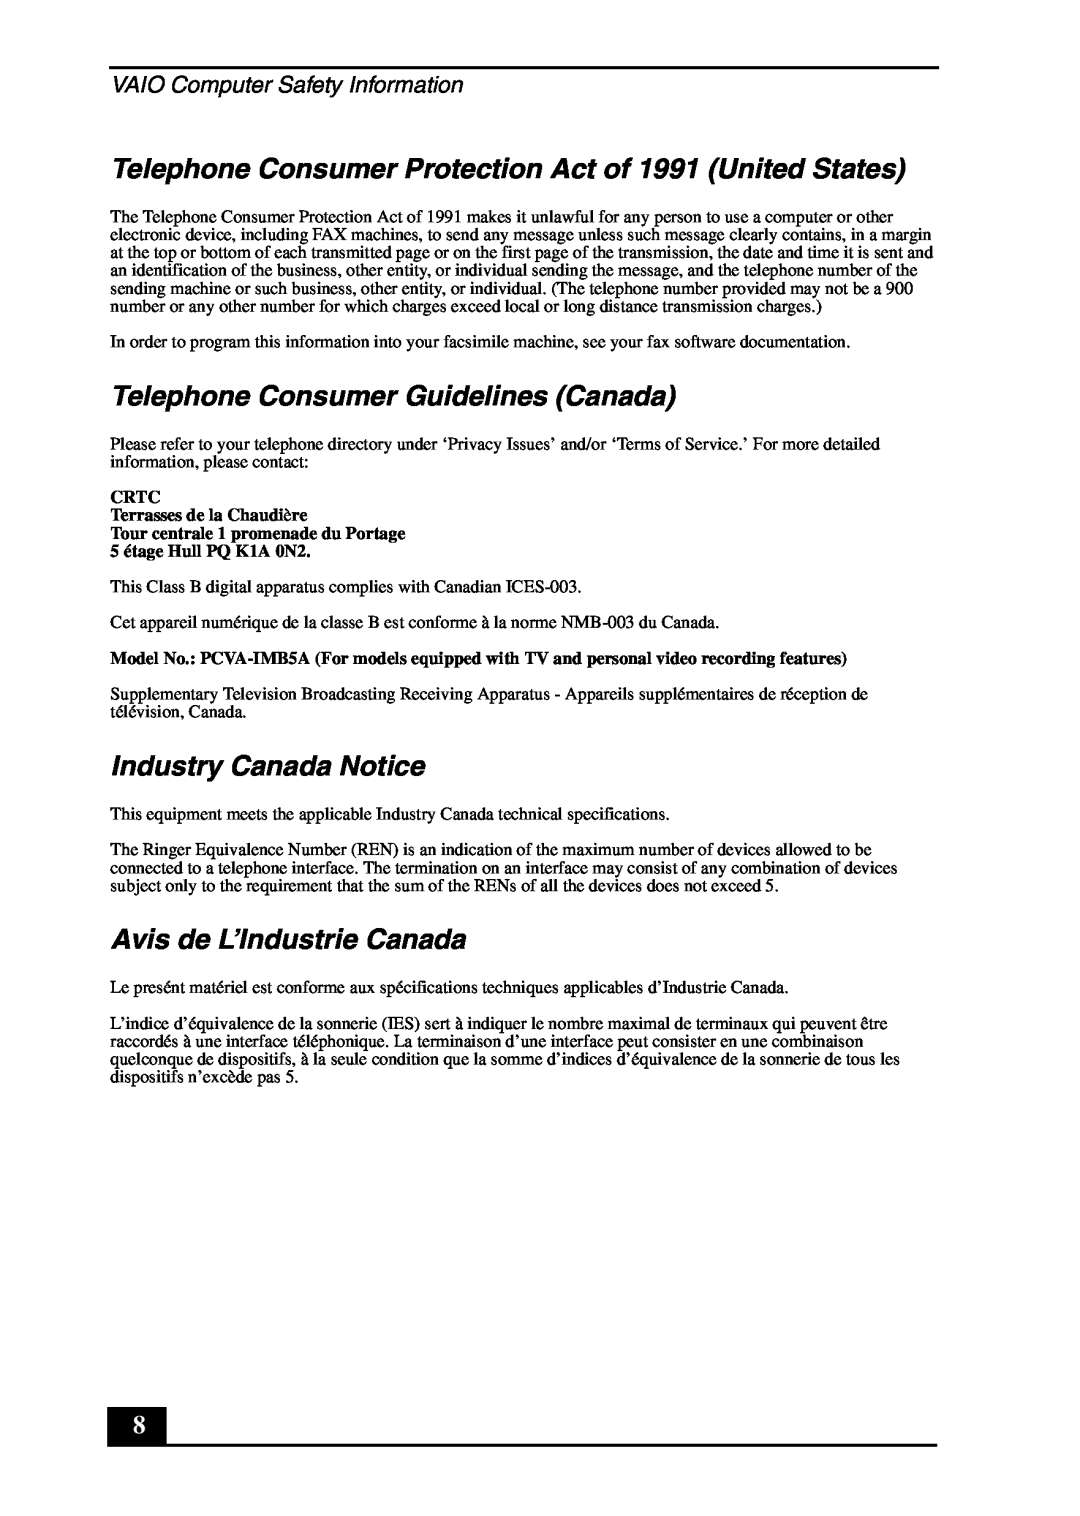 Sony VGC-RB40(G) manual Telephone Consumer Protection Act of 1991 United States, Telephone Consumer Guidelines Canada 